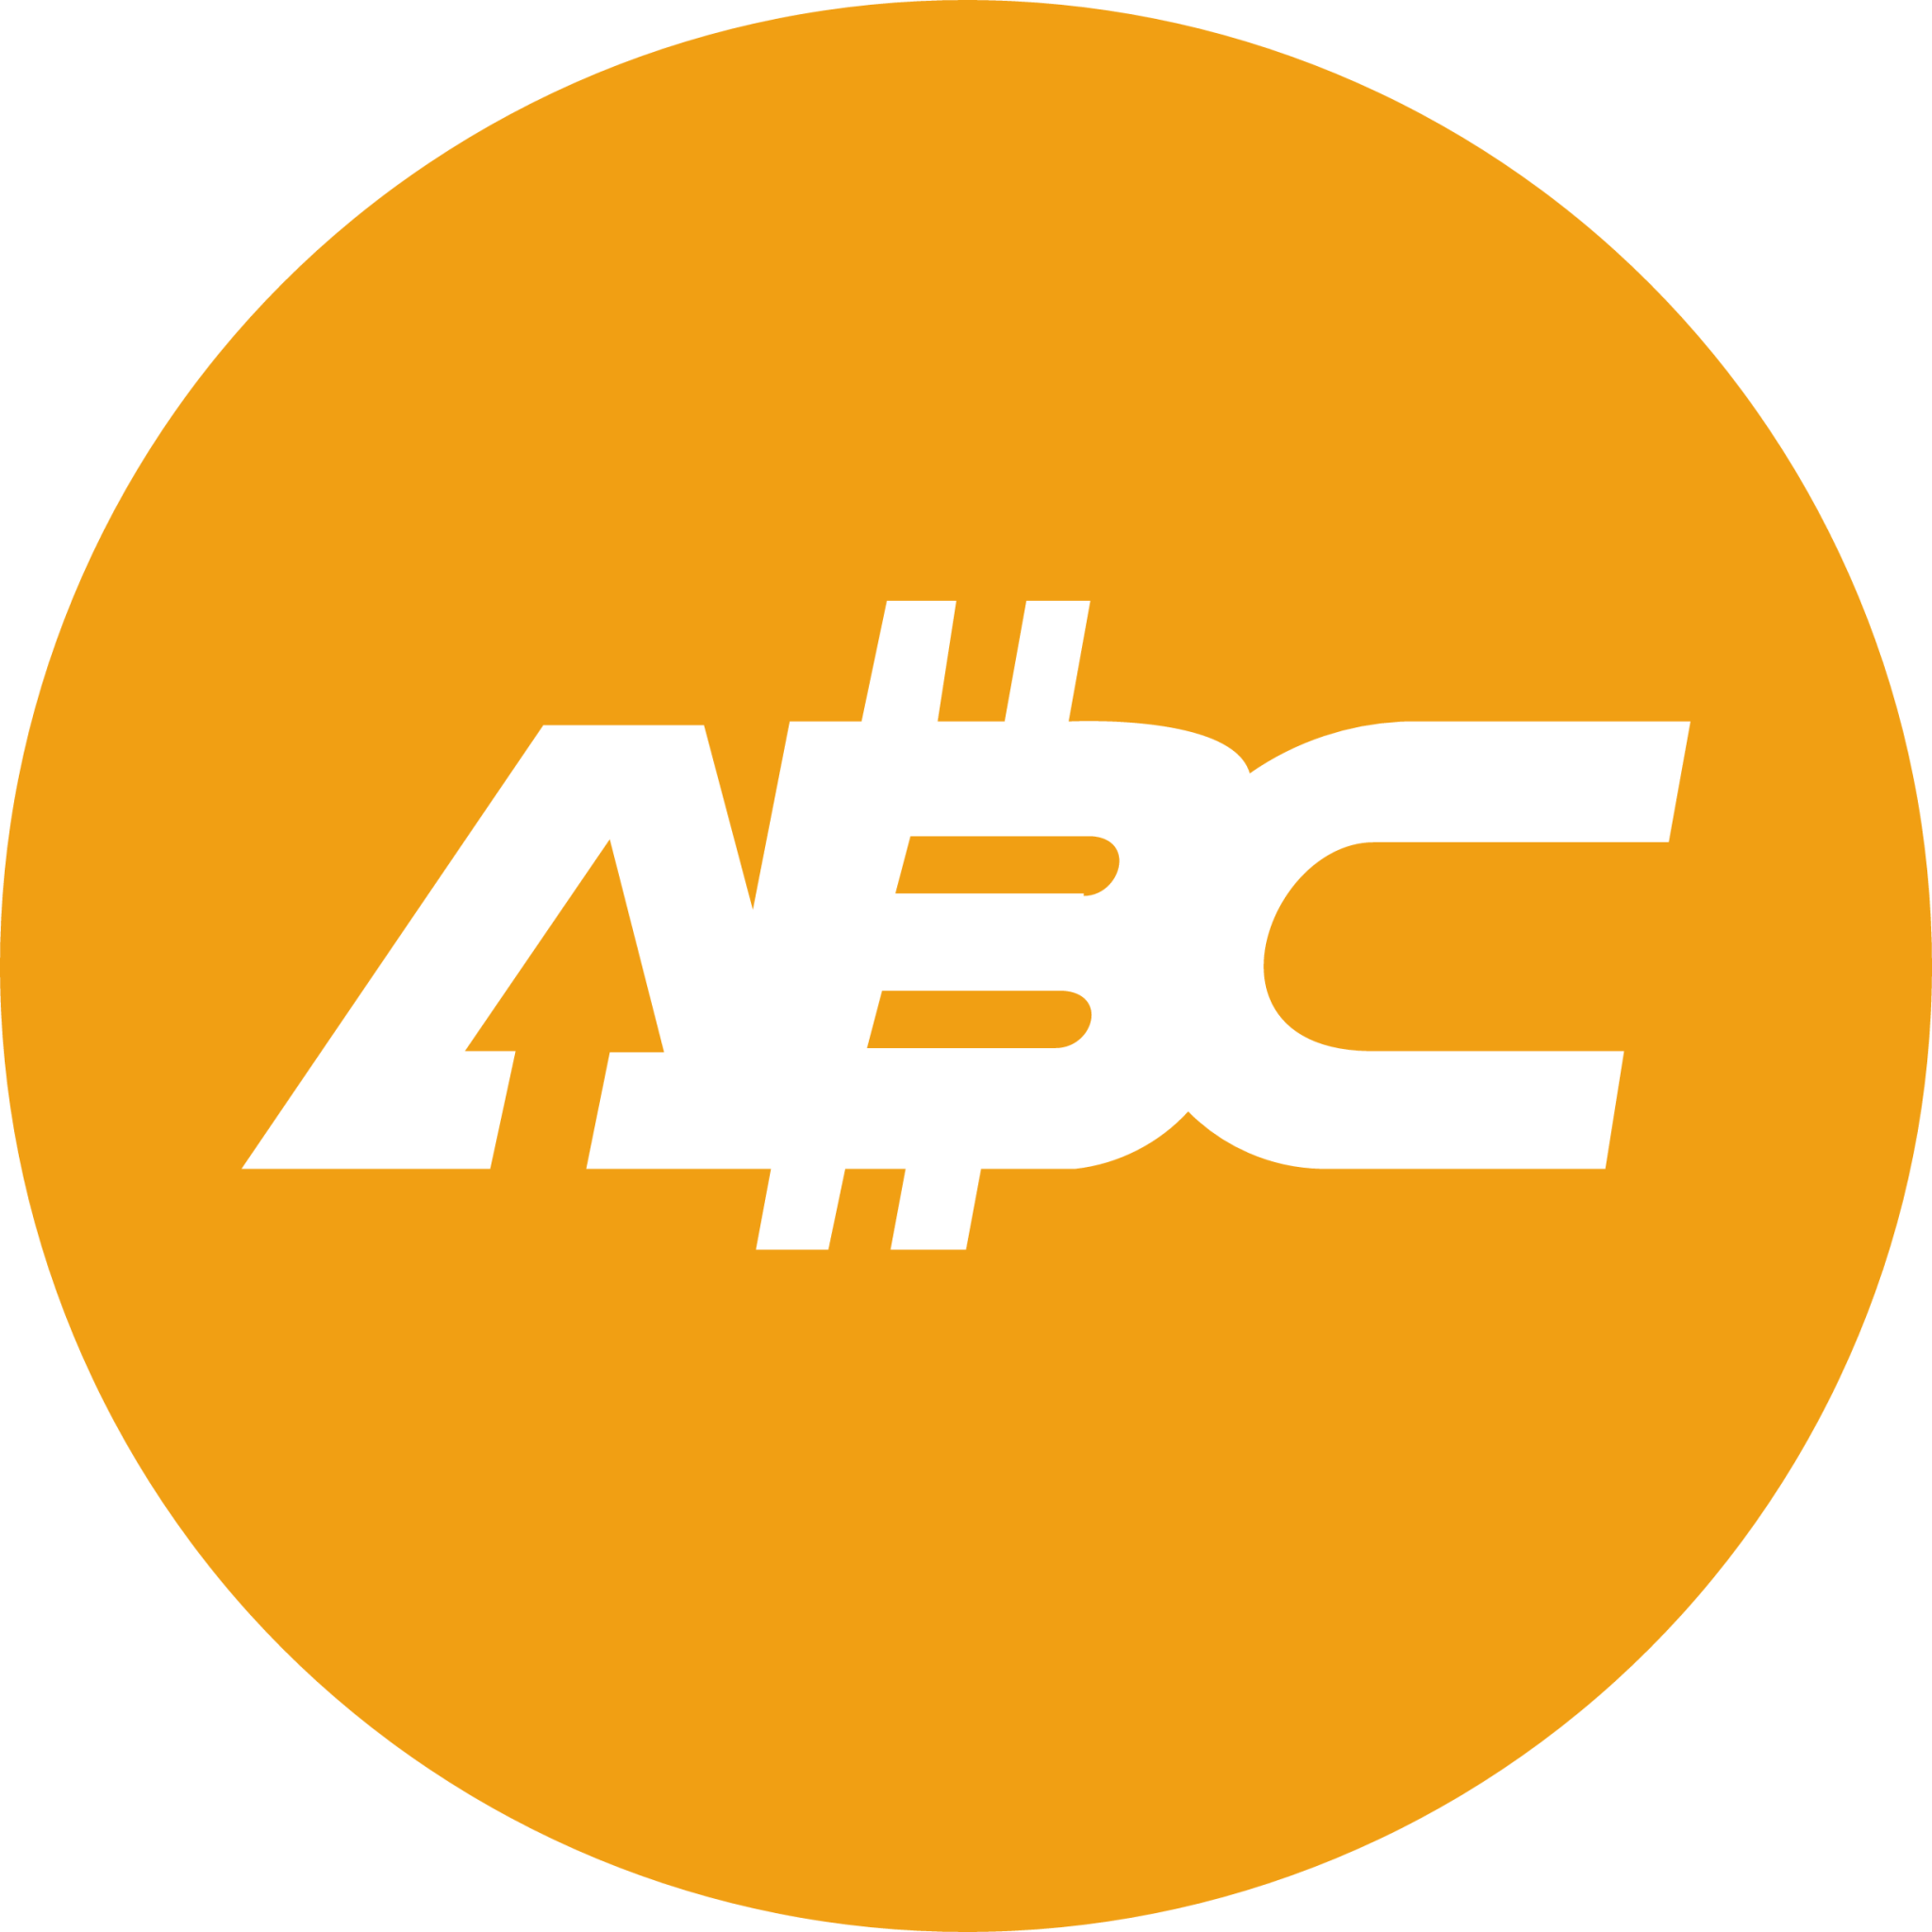 Bitcoin Cash ABC Cryptocurrency icon